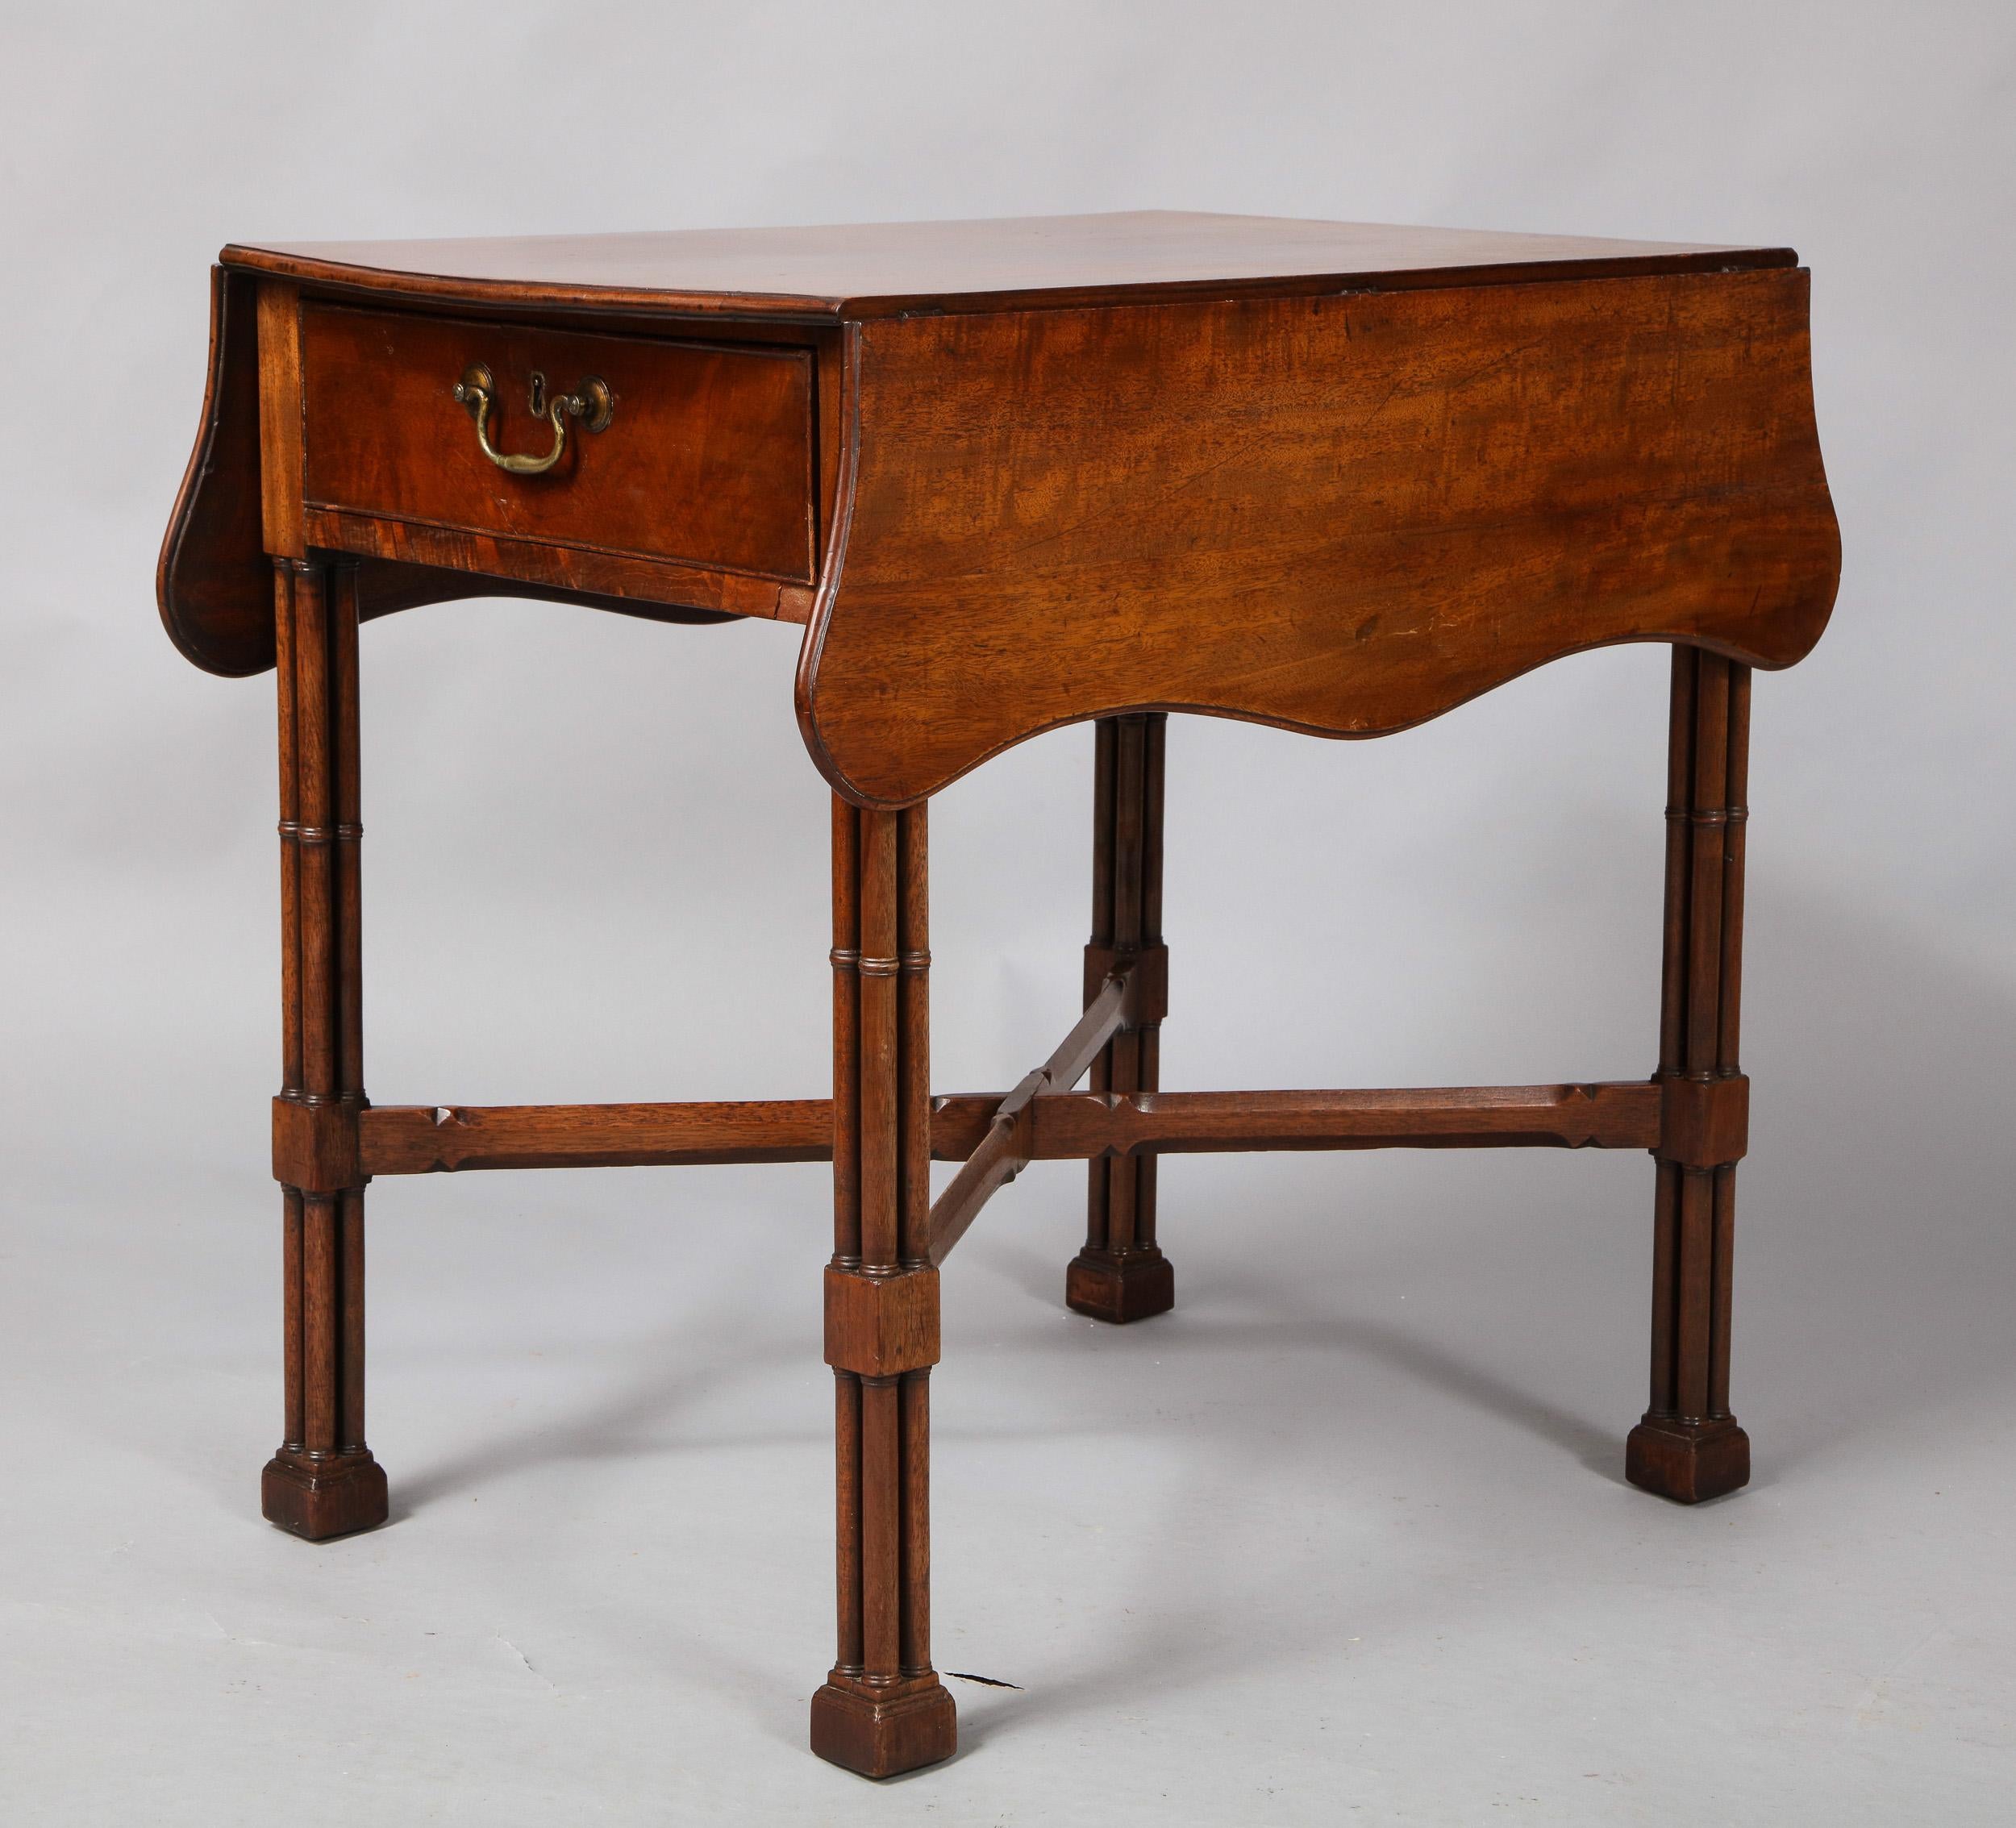 Chinese Chippendale Georgian Pembroke Table in the Manner of Thomas Chippendale